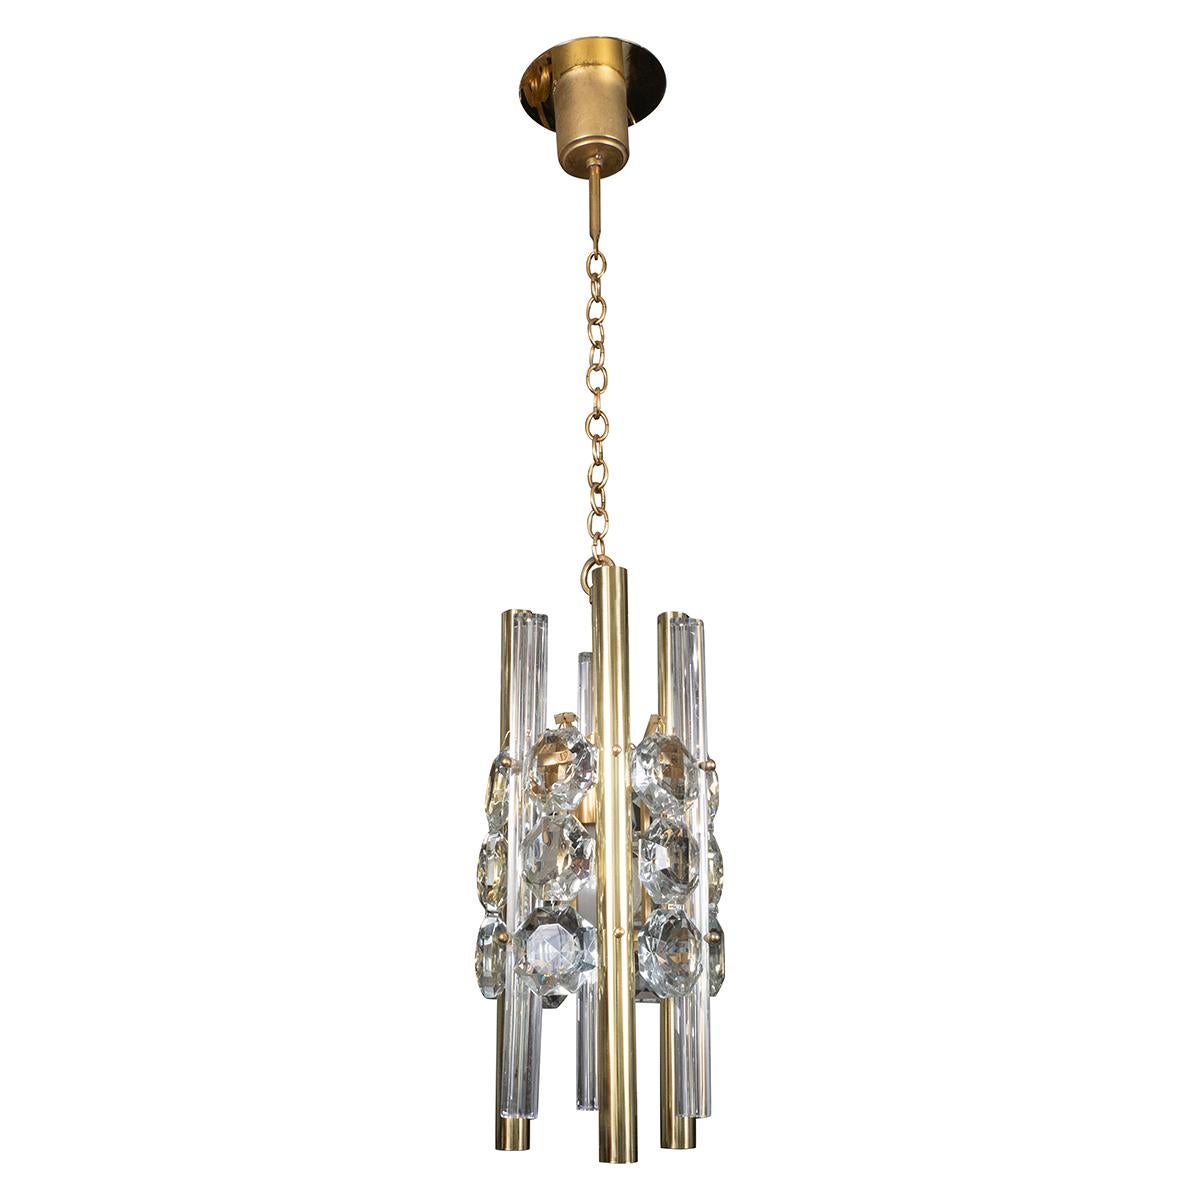 Brass pendant composed of facet-cut crystal elements and crystal rods in the style of Lobmeyr.